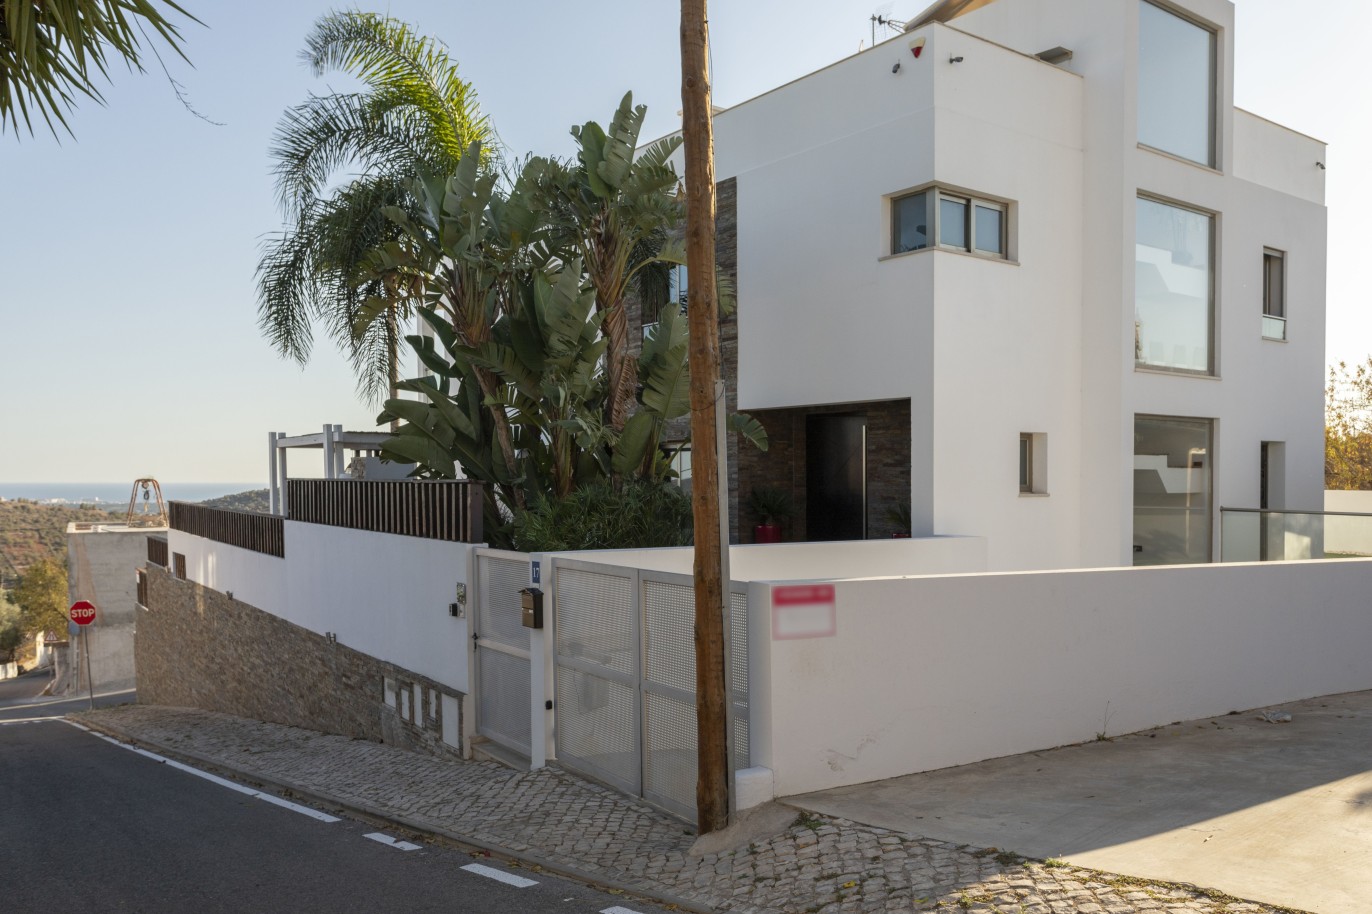 4 bedroom villa with pool and sea view, for sale in Loulé, Algarve_237400